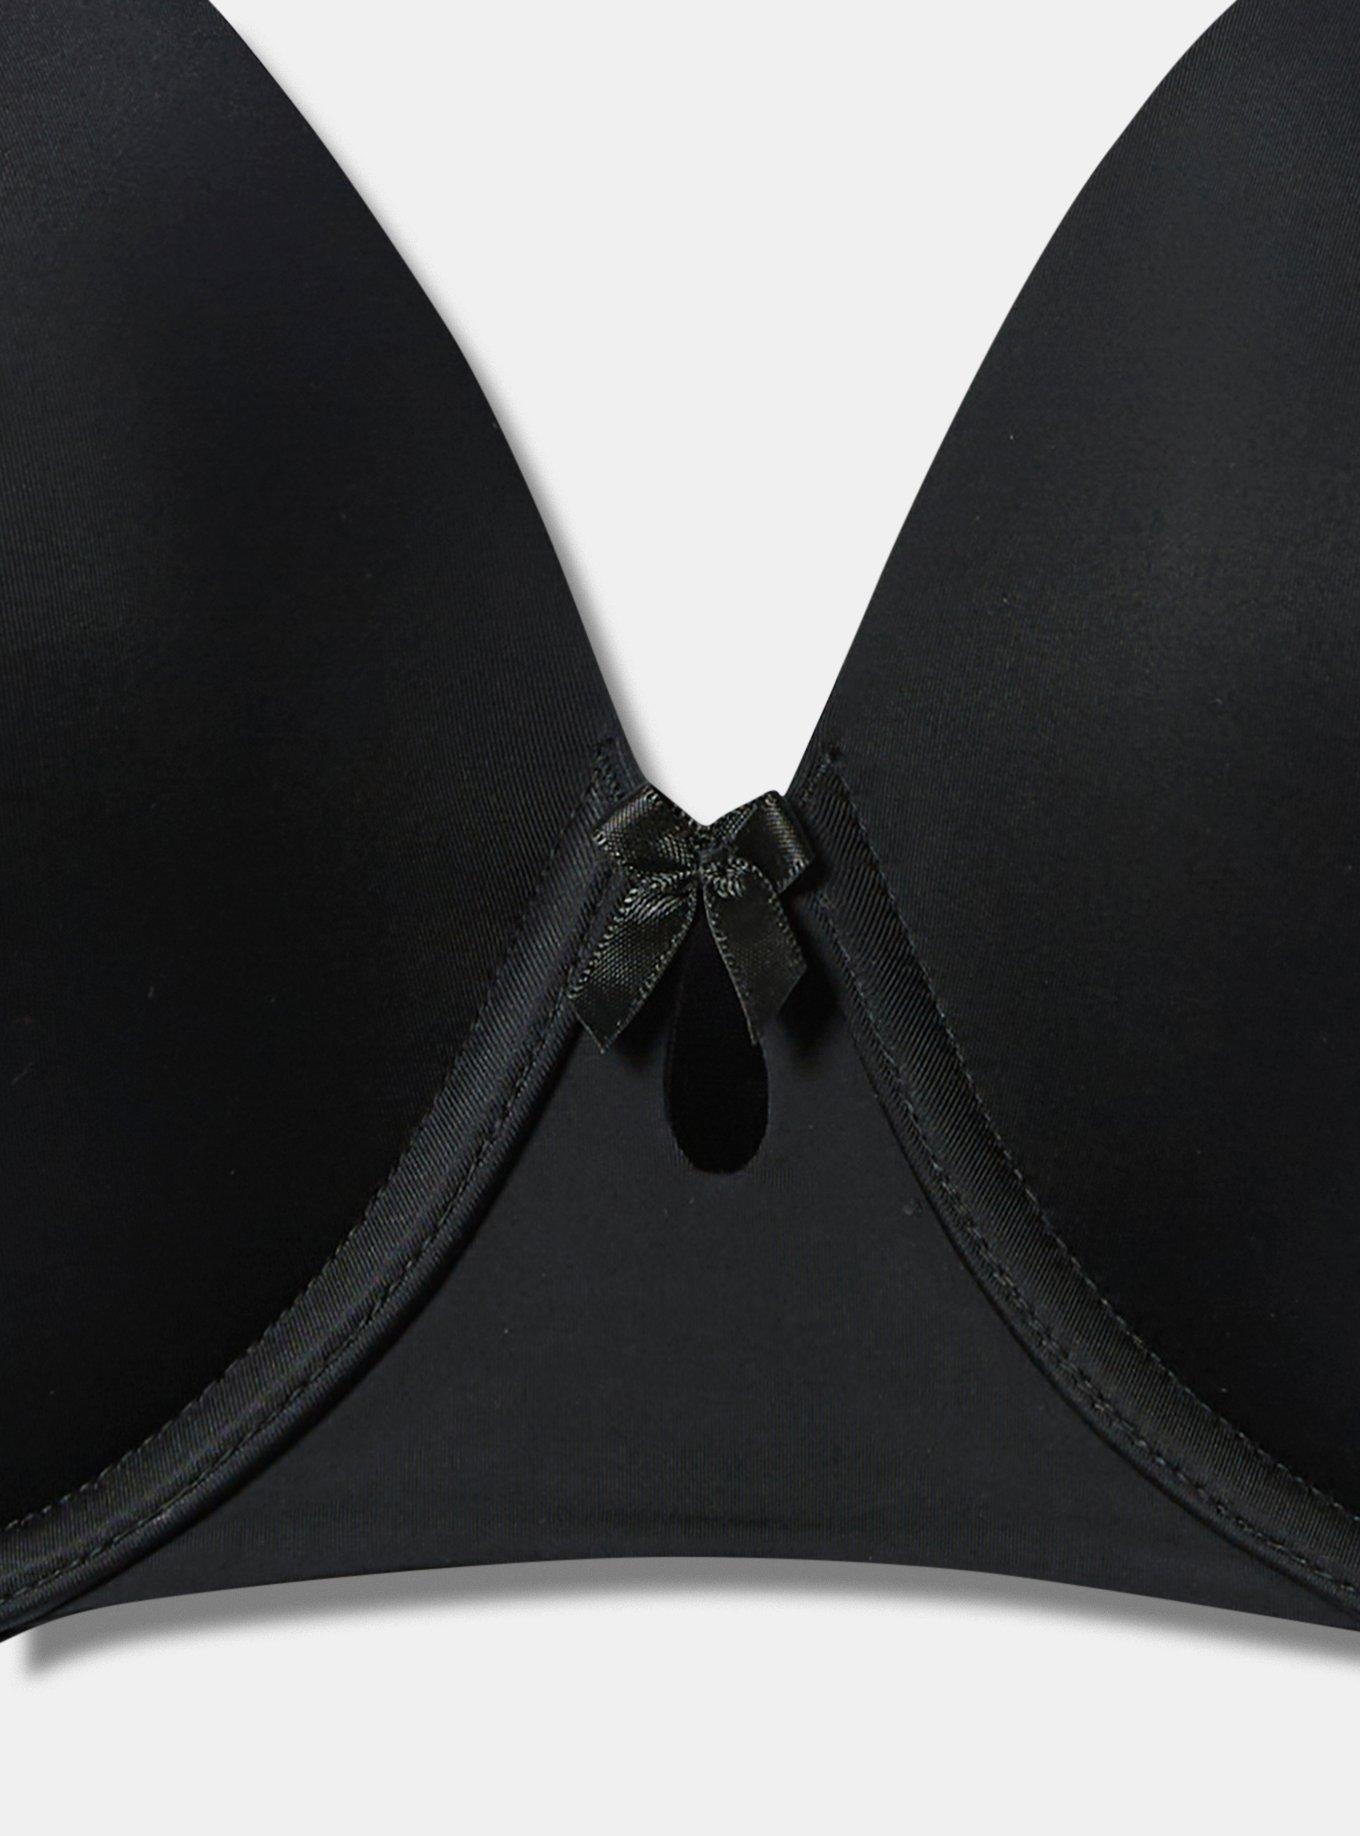 Torrid Plunge Push-Up Smooth 360° Back Smoothing™ Bra 44DD Black Micro  stars Size undefined - $25 - From April